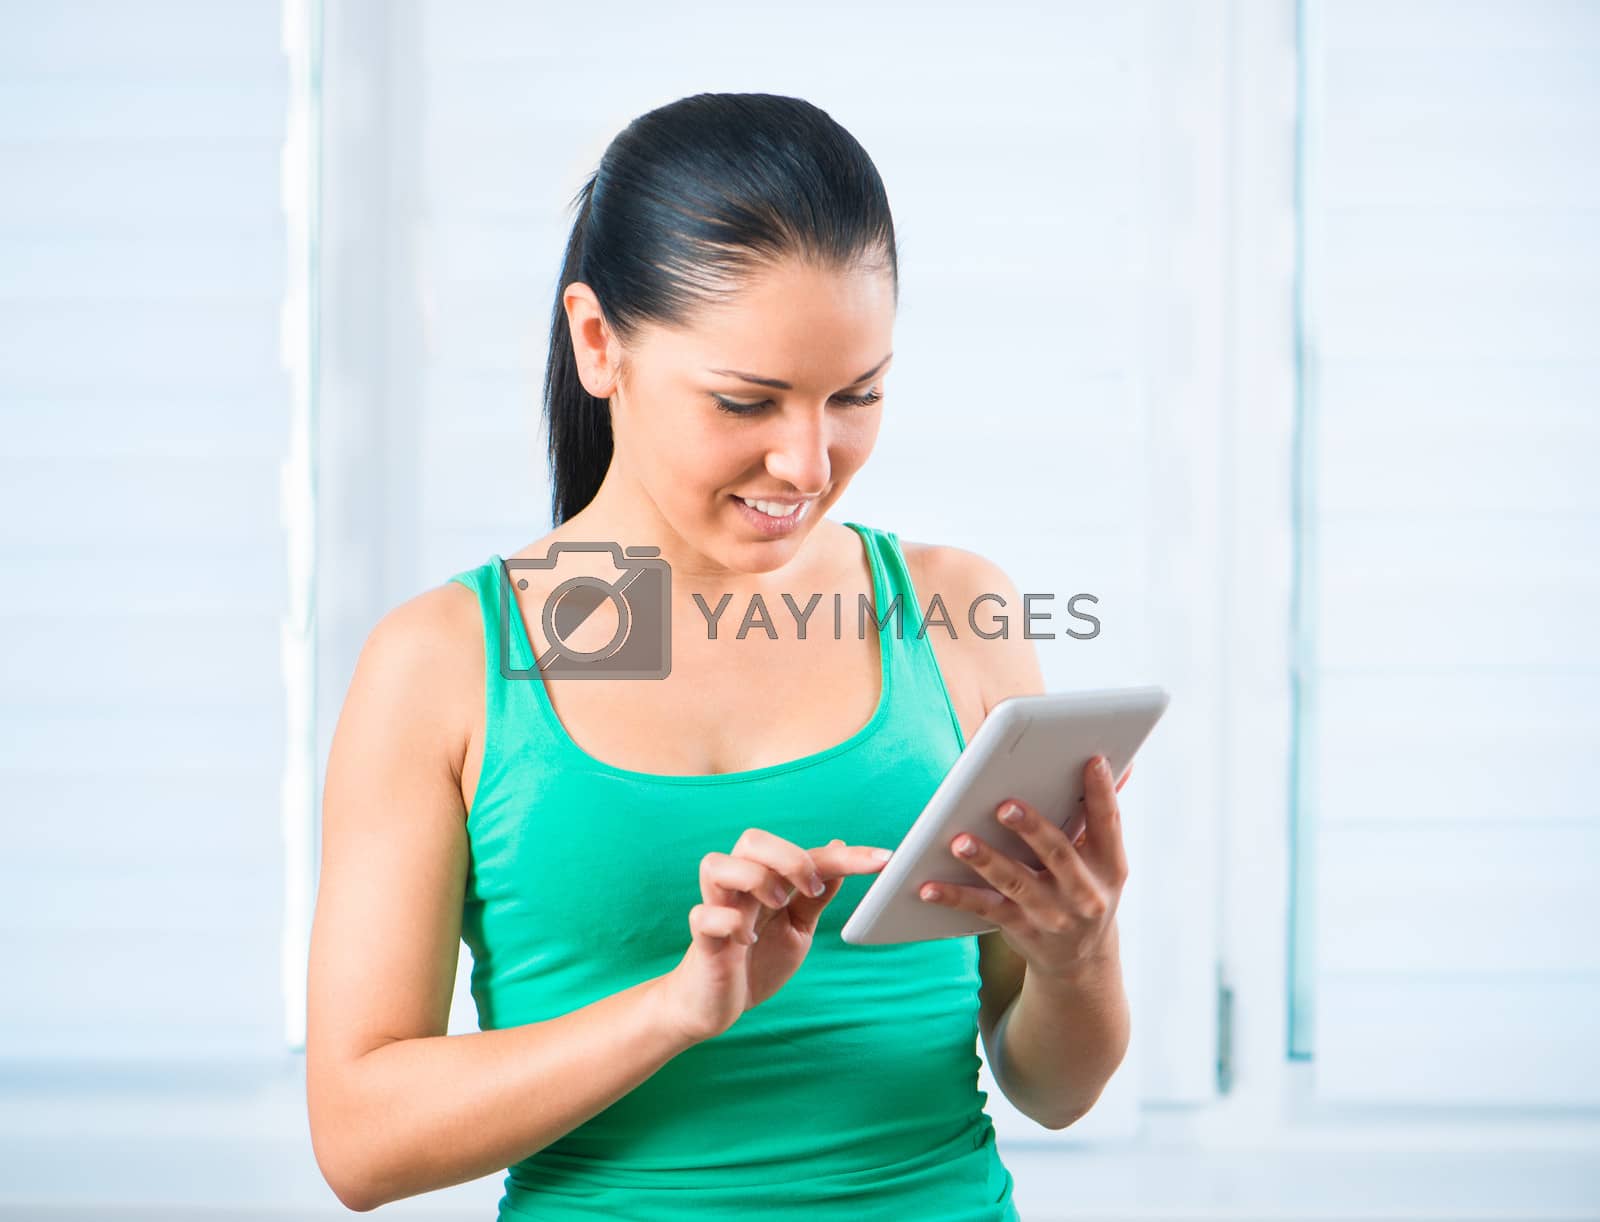 Royalty free image of girl with the TouchPad by GekaSkr